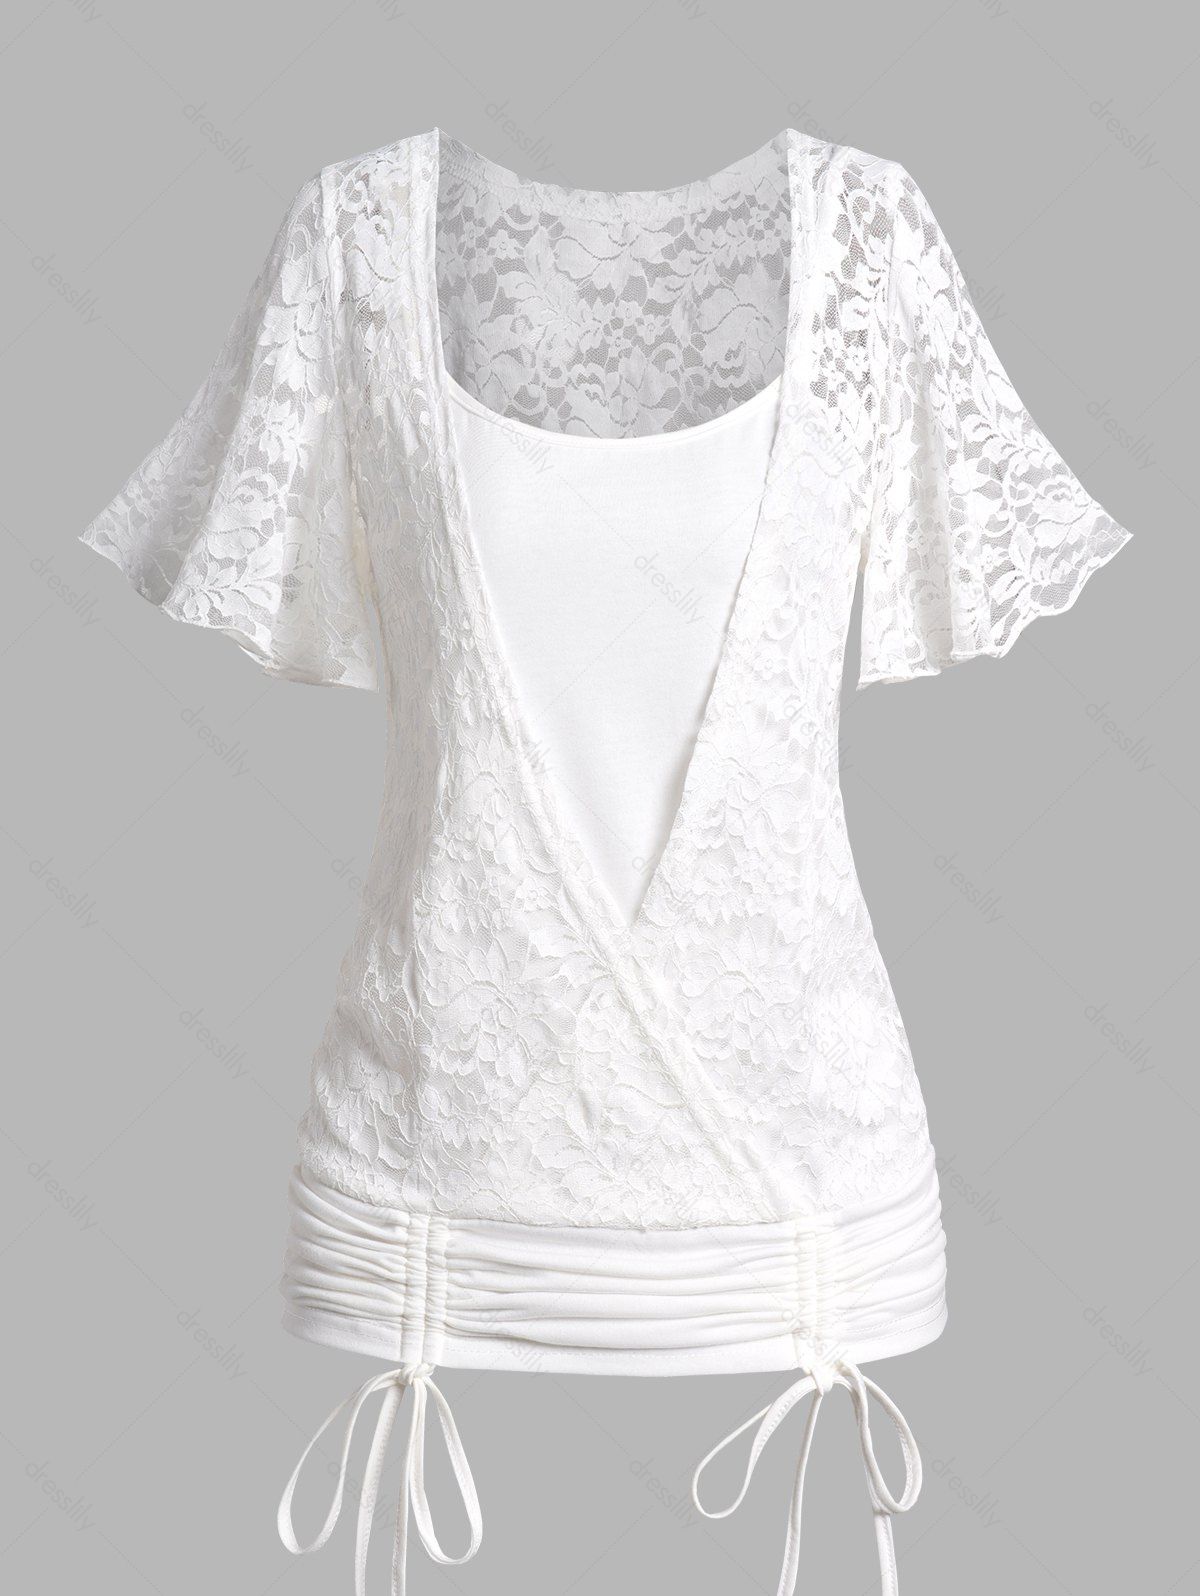 Dresslily Lace Cinched Overlay T Shirt Plain Color Flutter Sleeve Casual Faux Twinset Top